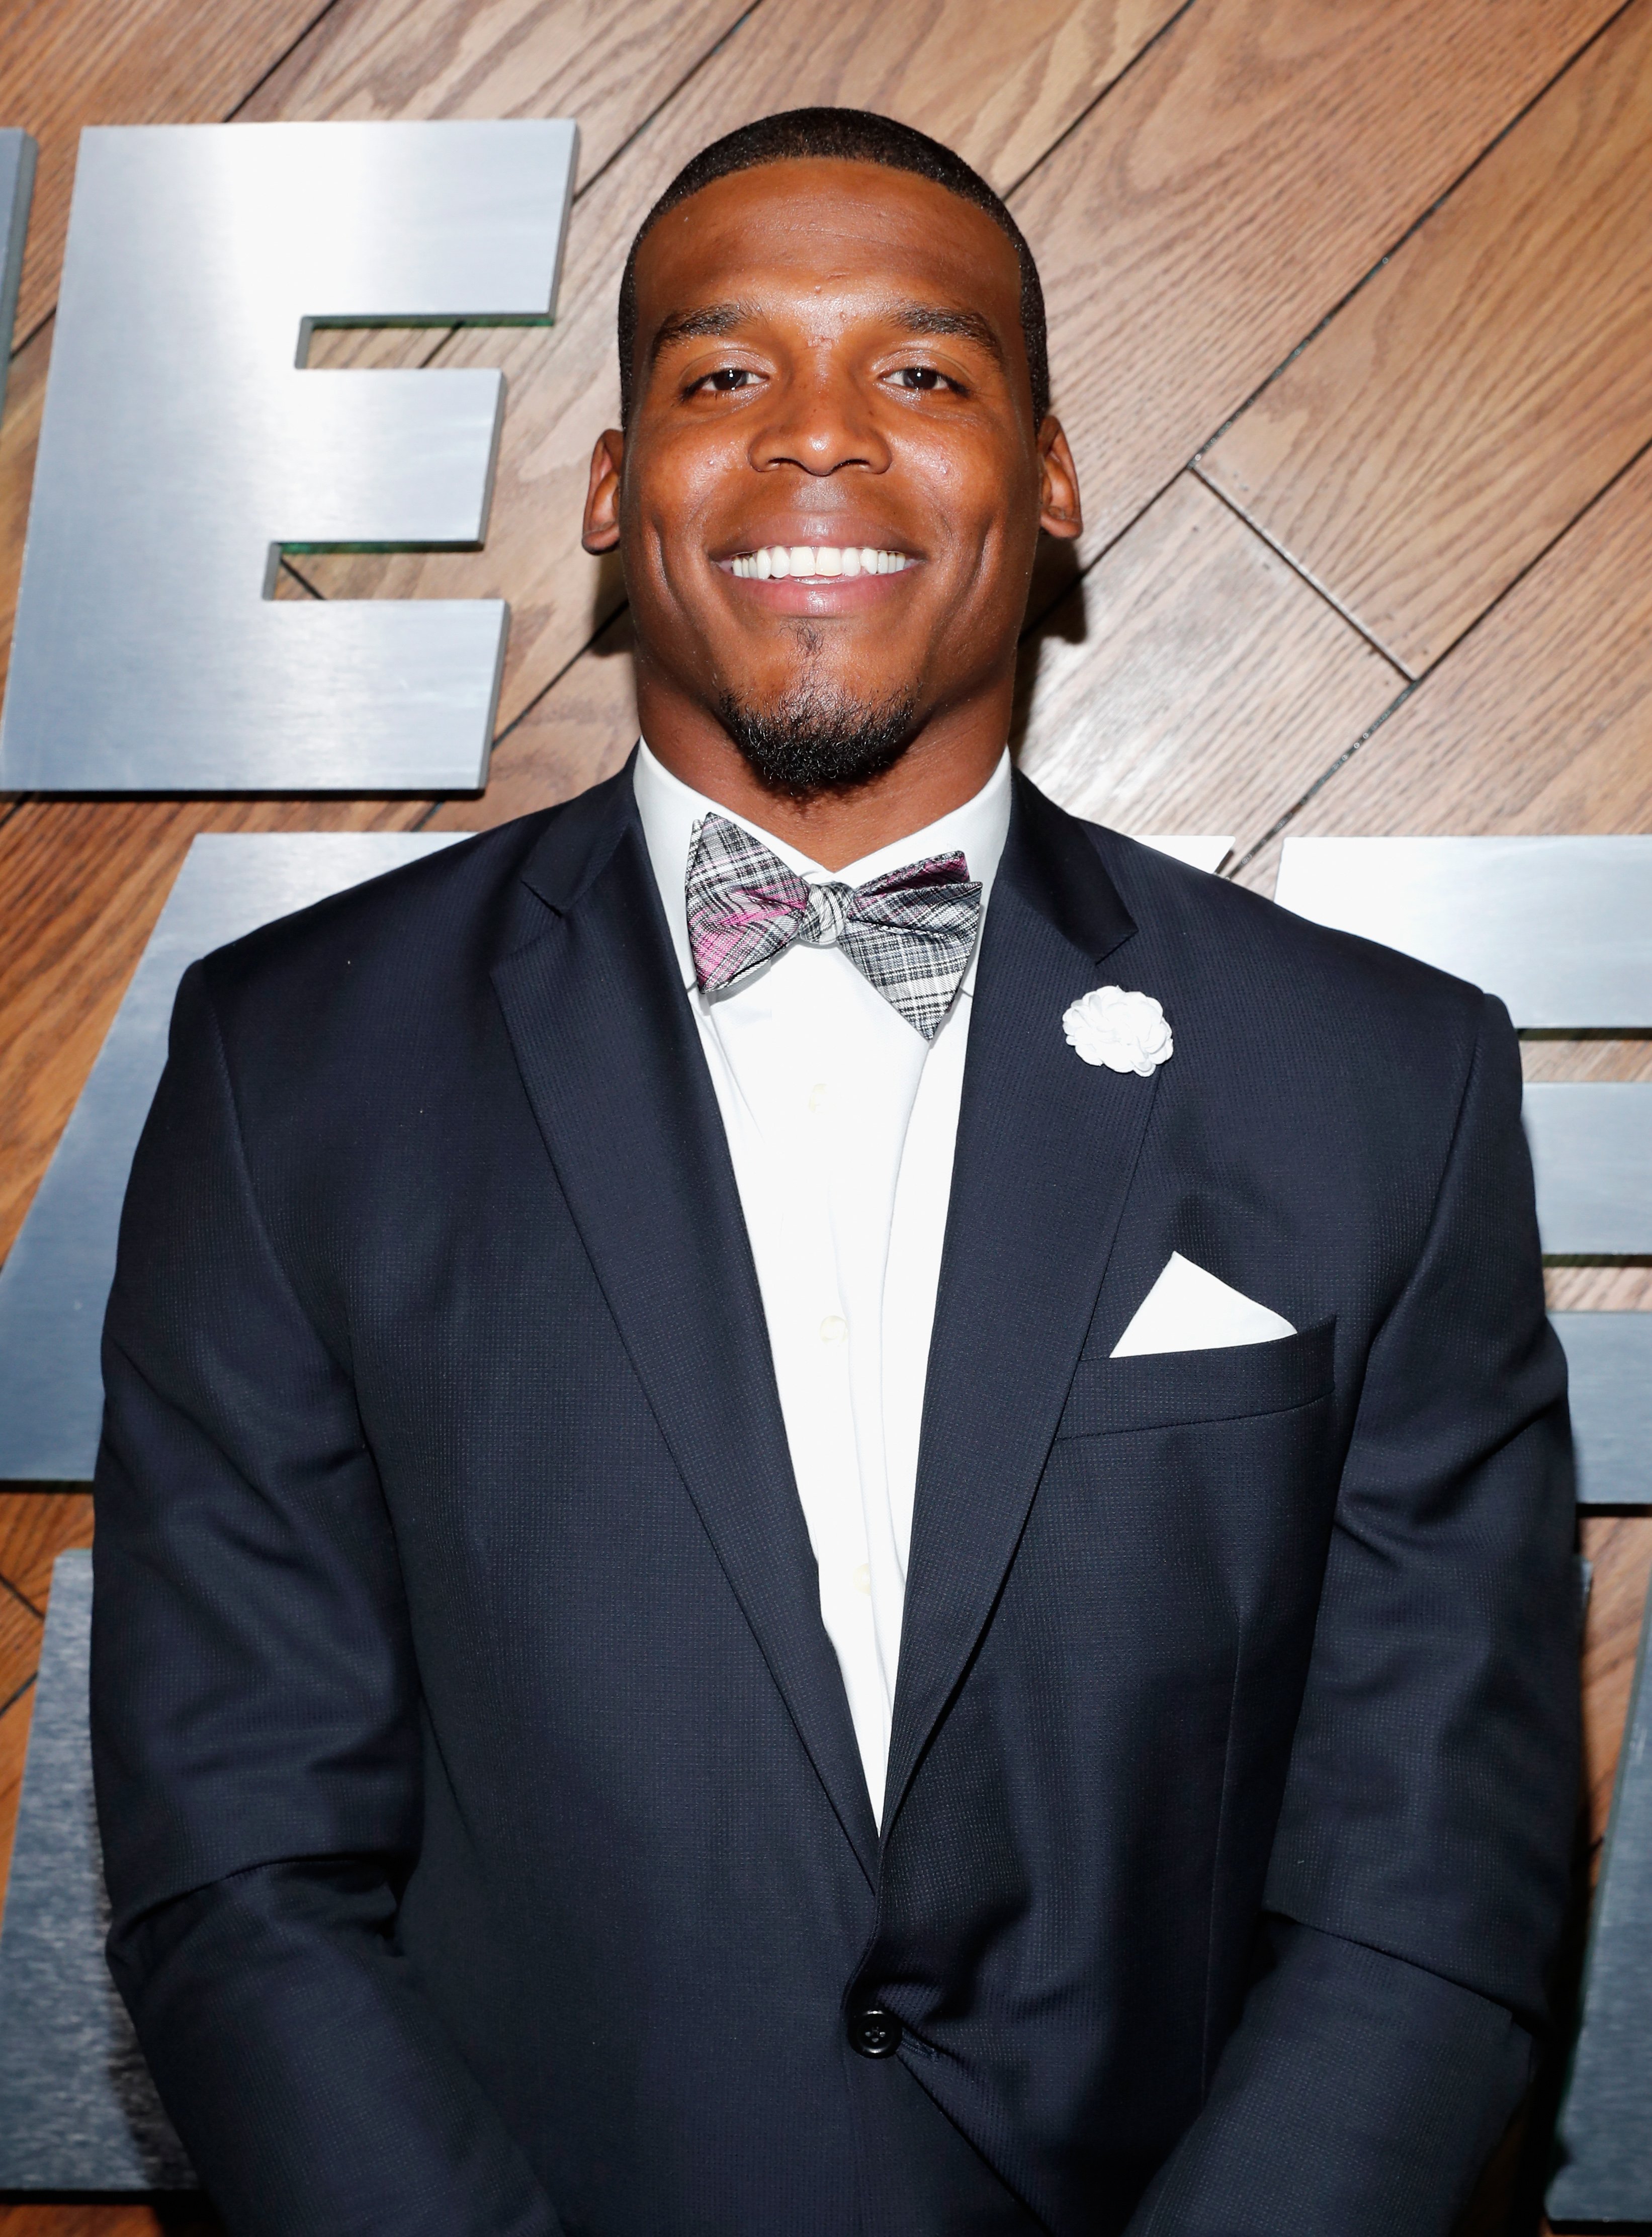 Cam Newton attends The Players' Tribune Summer Party on July 12, 2016 in California | Photo: Getty Images